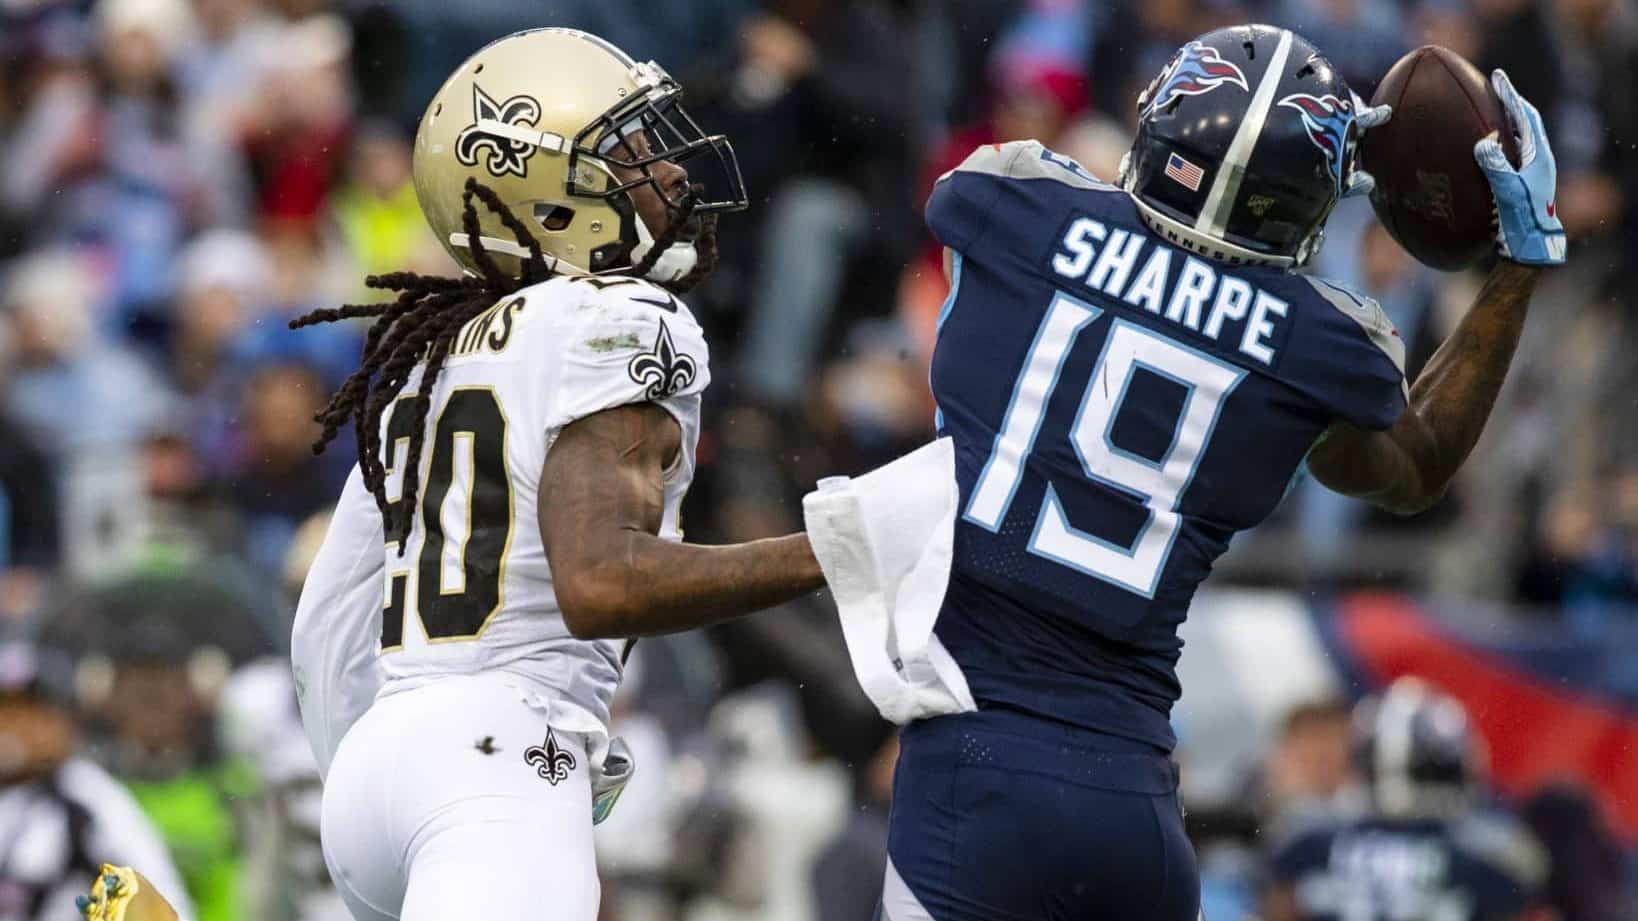 NASHVILLE, TN - DECEMBER 22: Tajae Sharpe #19 of the Tennessee Titans makes a touchdown reception against Janoris Jenkins #20 of the New Orleans Saints during the fourth quarter at Nissan Stadium on December 22, 2019 in Nashville, Tennessee. New Orleans defeats Tennessee 38-28.